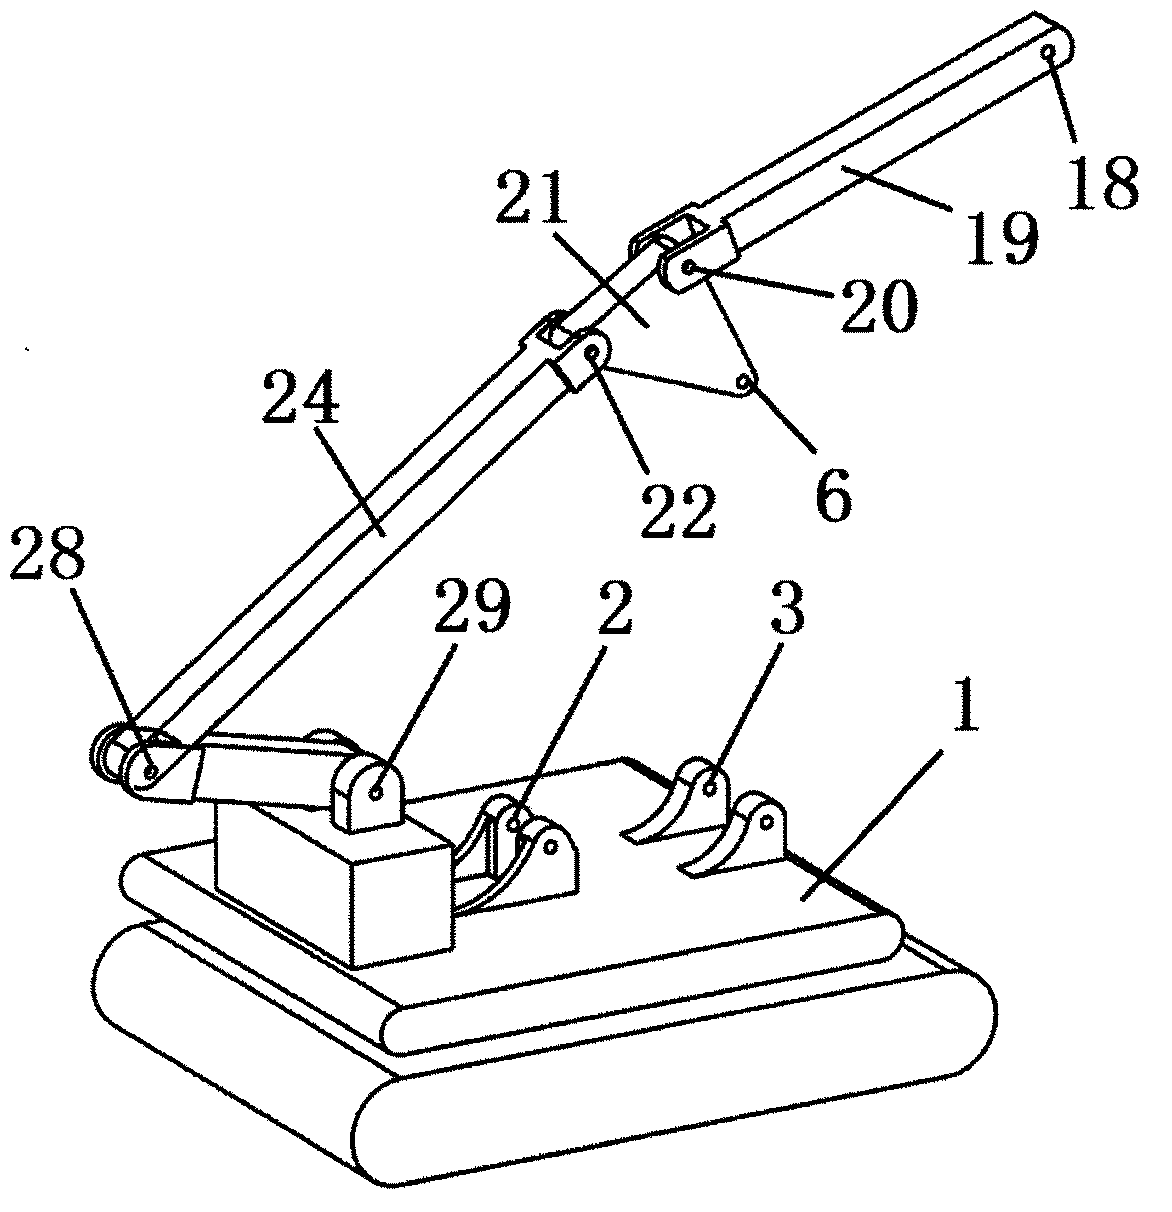 Screw-driven and multi-degree-of-freedom controllable mechanism type excavating mechanism